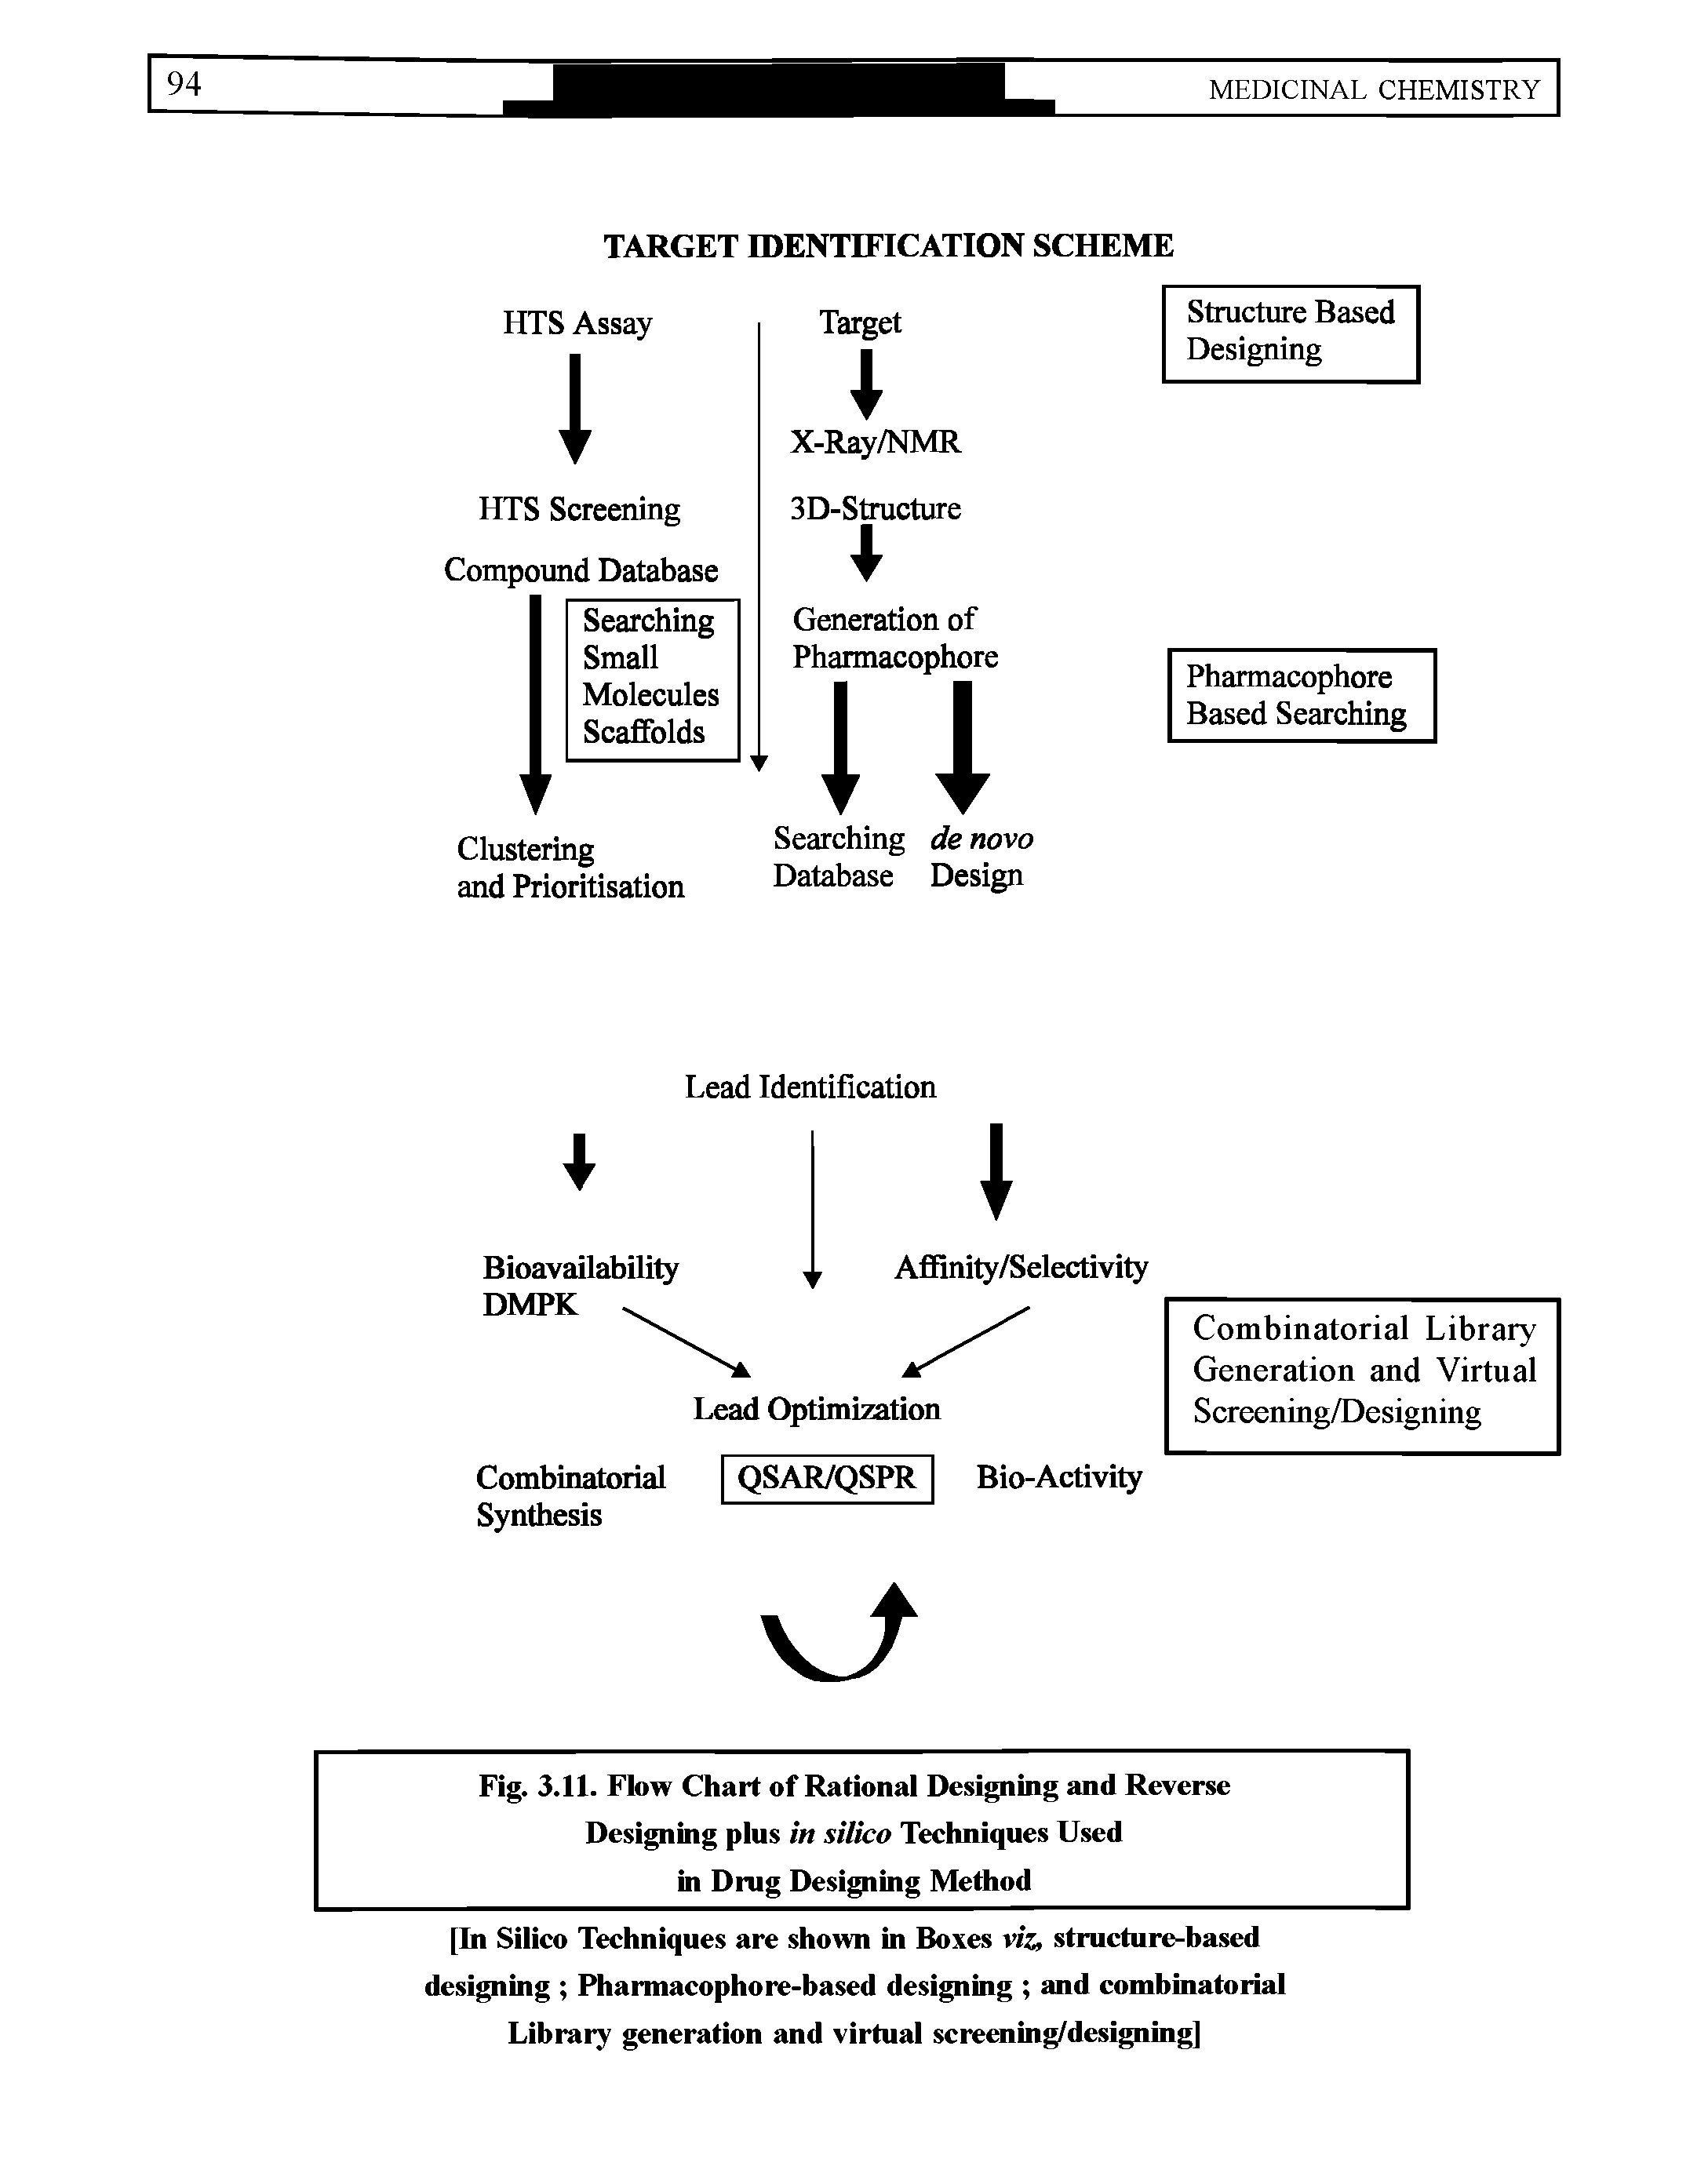 Fig. 3.11. Flow Chart of Rational Designing and Reverse Designing plus in silica Techniques Used in Drug Designing Method...